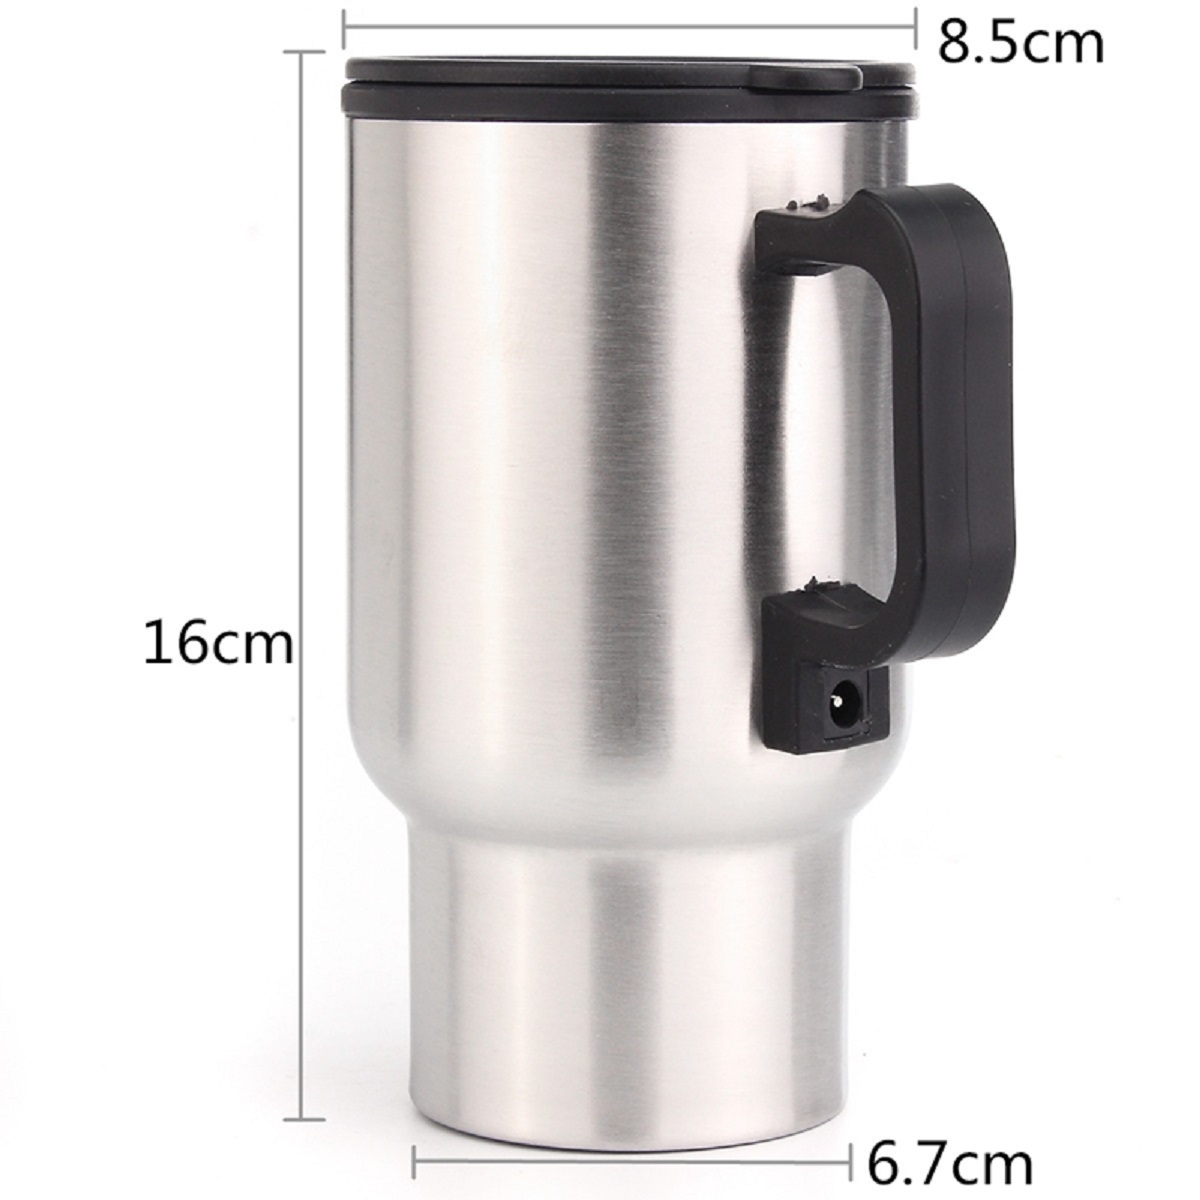 12V 450ml Car Hot Kettle Vehicle Mounted Thermal Travel Cup Handy Pot thermostat Bottle Coffee Mug Water Heat-preservation